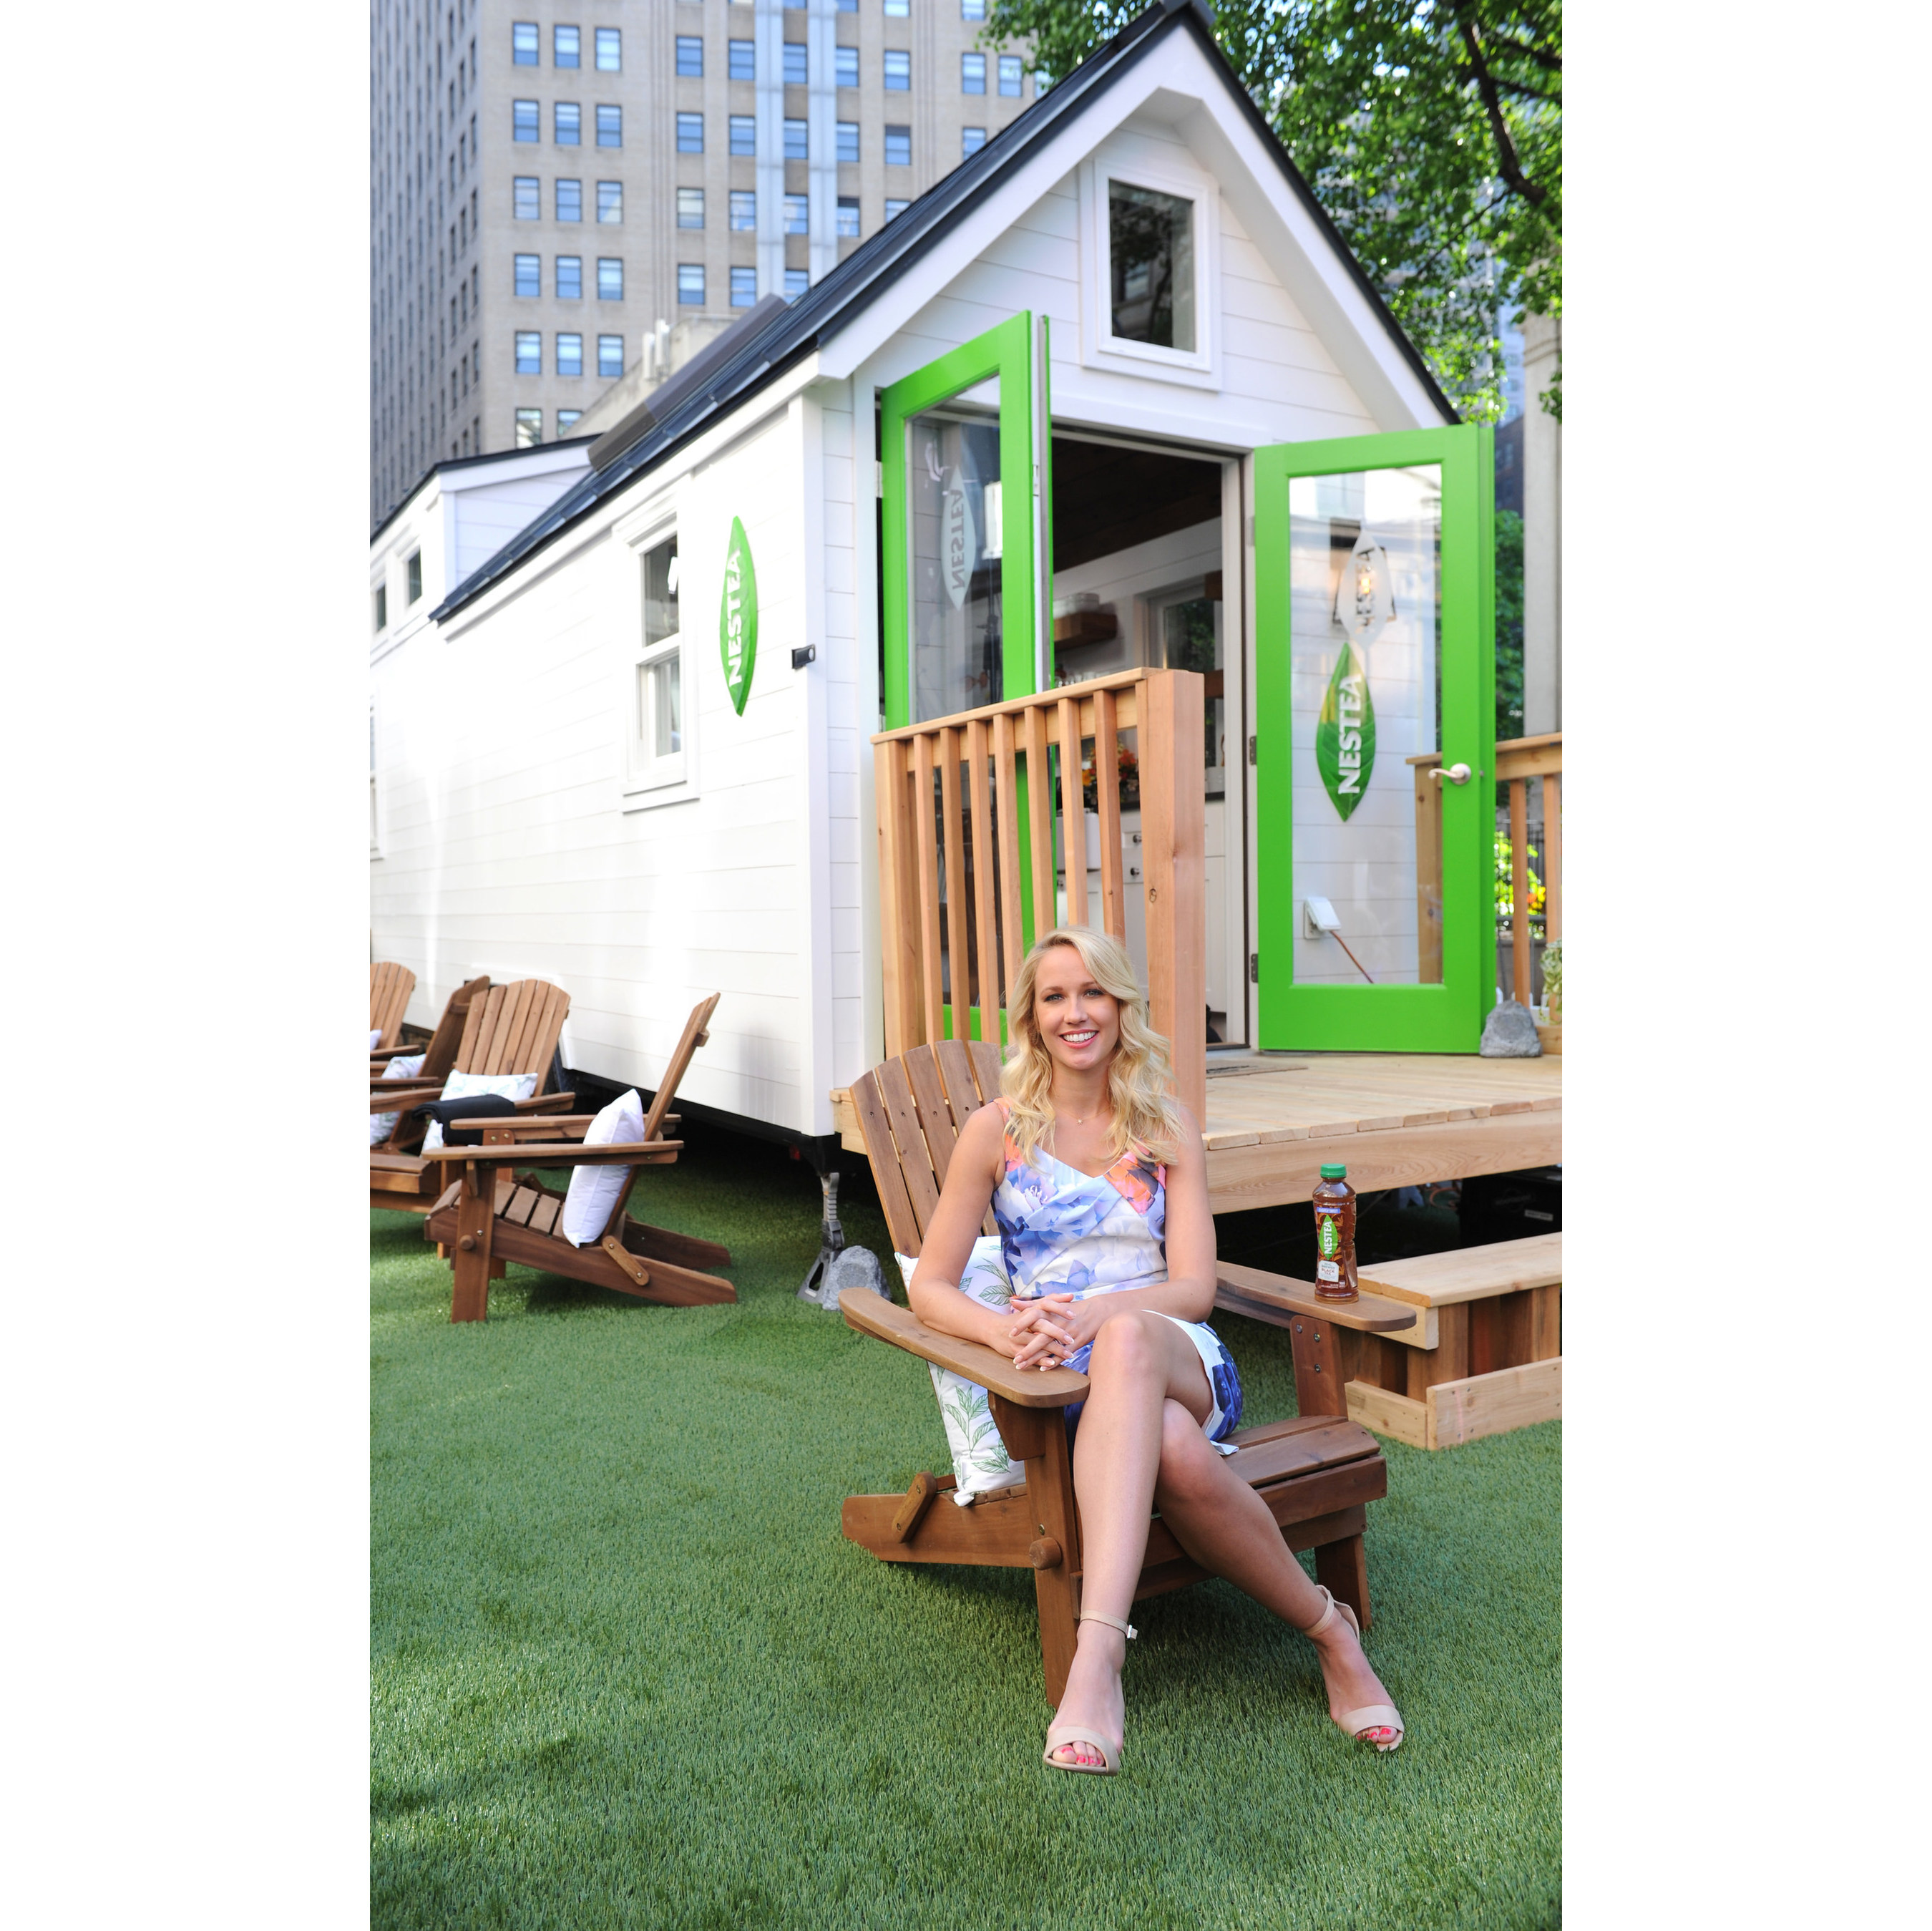 NEW YORK, NY - MAY 17: Actress Anna Camp launches the new NESTEA in Herald Square at the NESTEA Tiny House on May 17, 2017 in New York City. Designed in part by bloggers Southern Bite, Inspired by Charm, and Hapa Time, the NESTEA Tiny House is unveiled in Herald Square. (Photo by Craig Barritt/Getty Images) (PRNewsfoto/NESTEA)